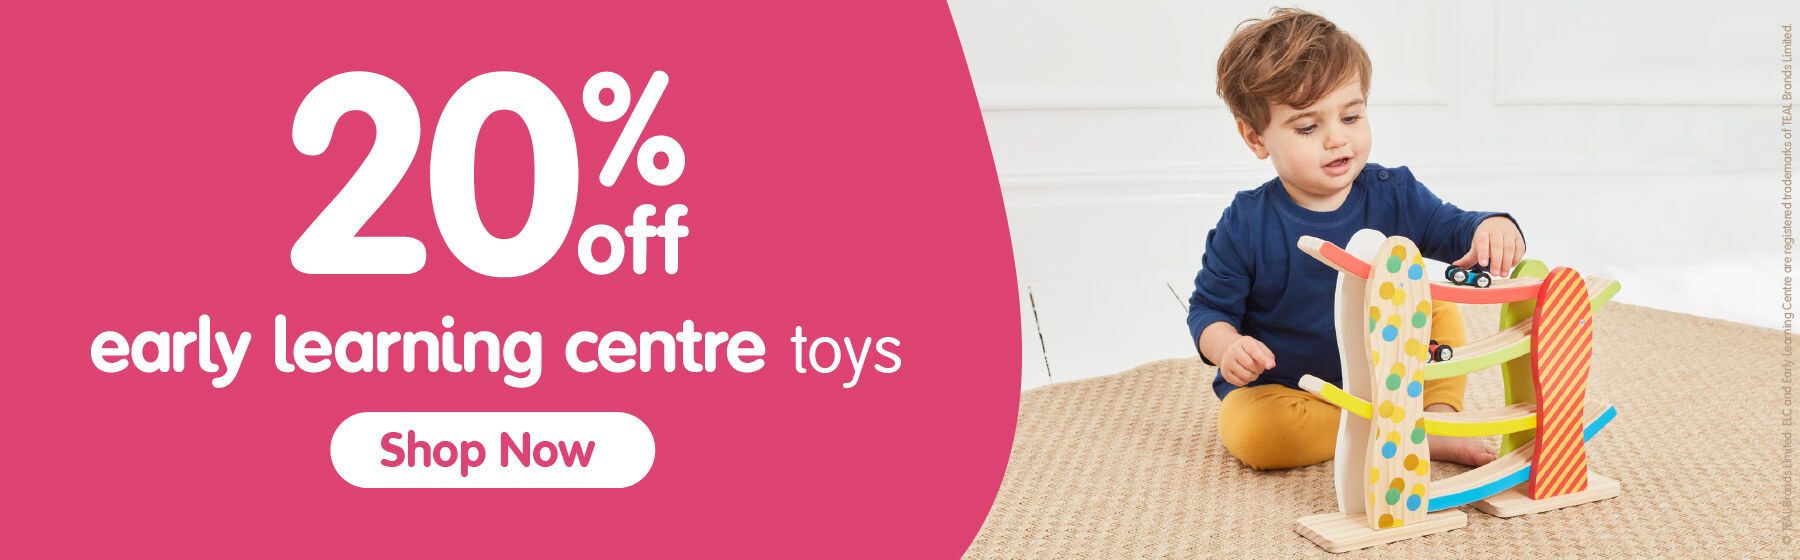 20% Off Early Learning Centre Toys